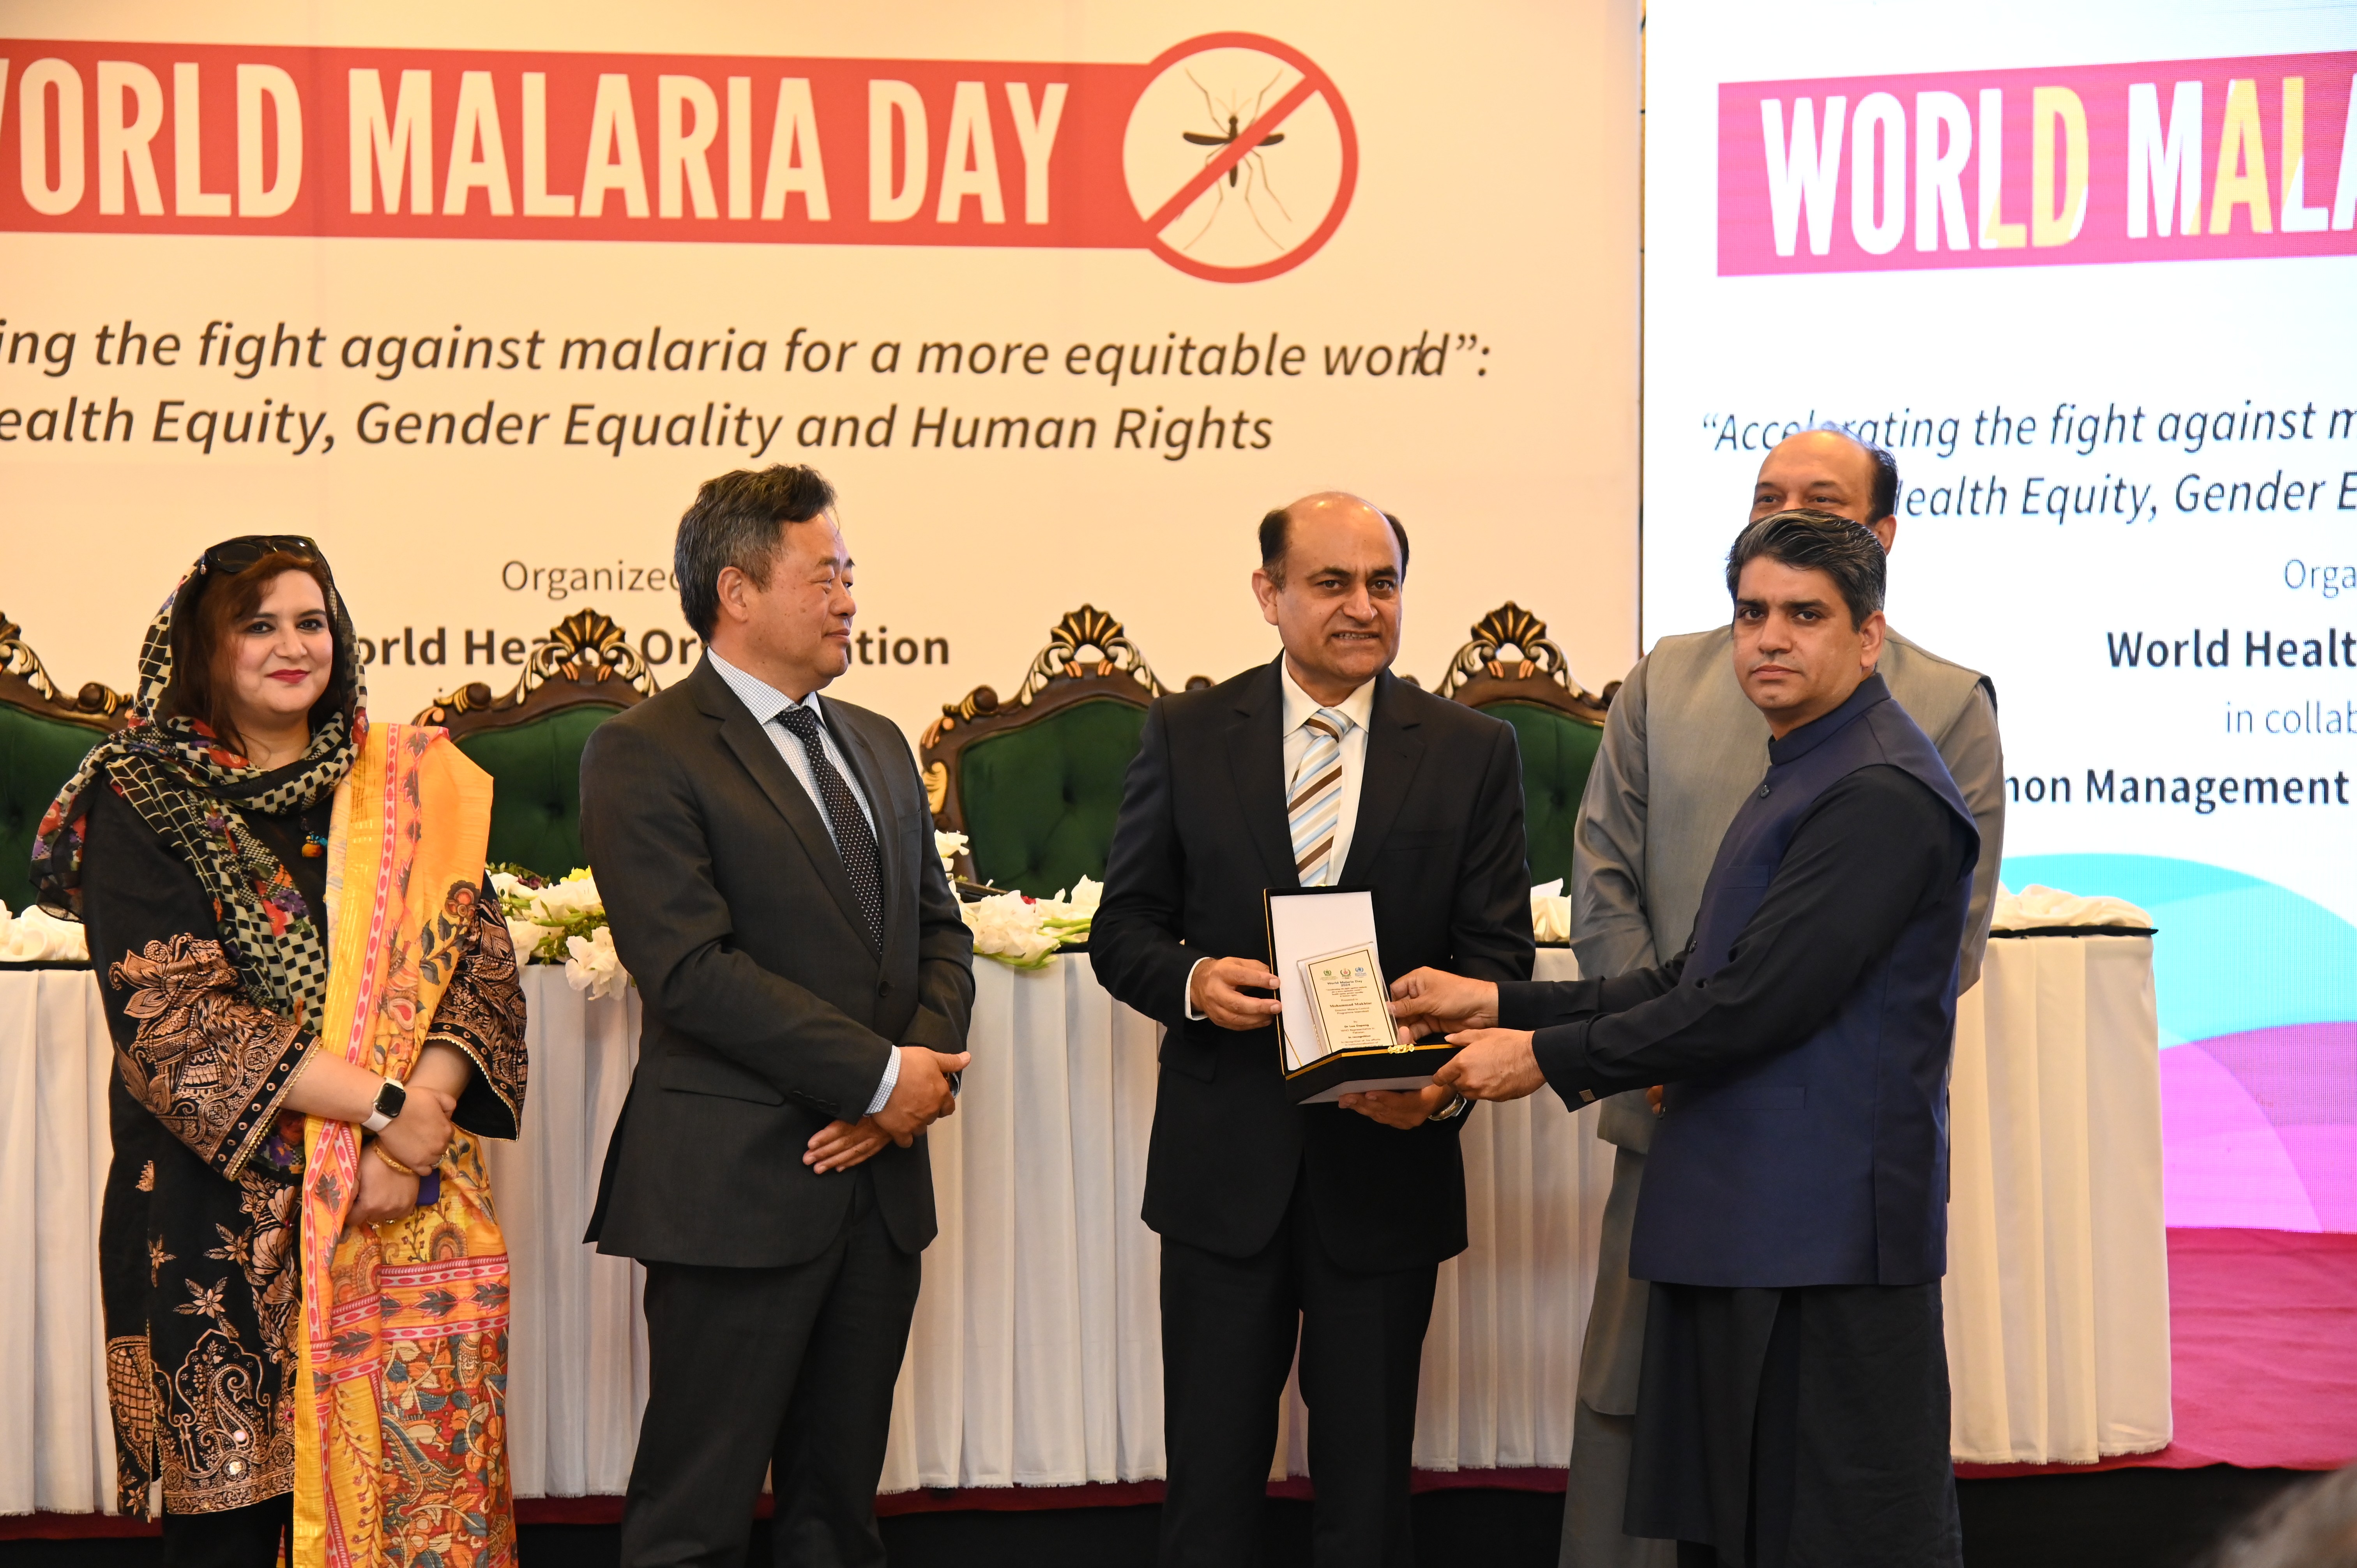 The shield distribution at the event of World Malaria Day 2035